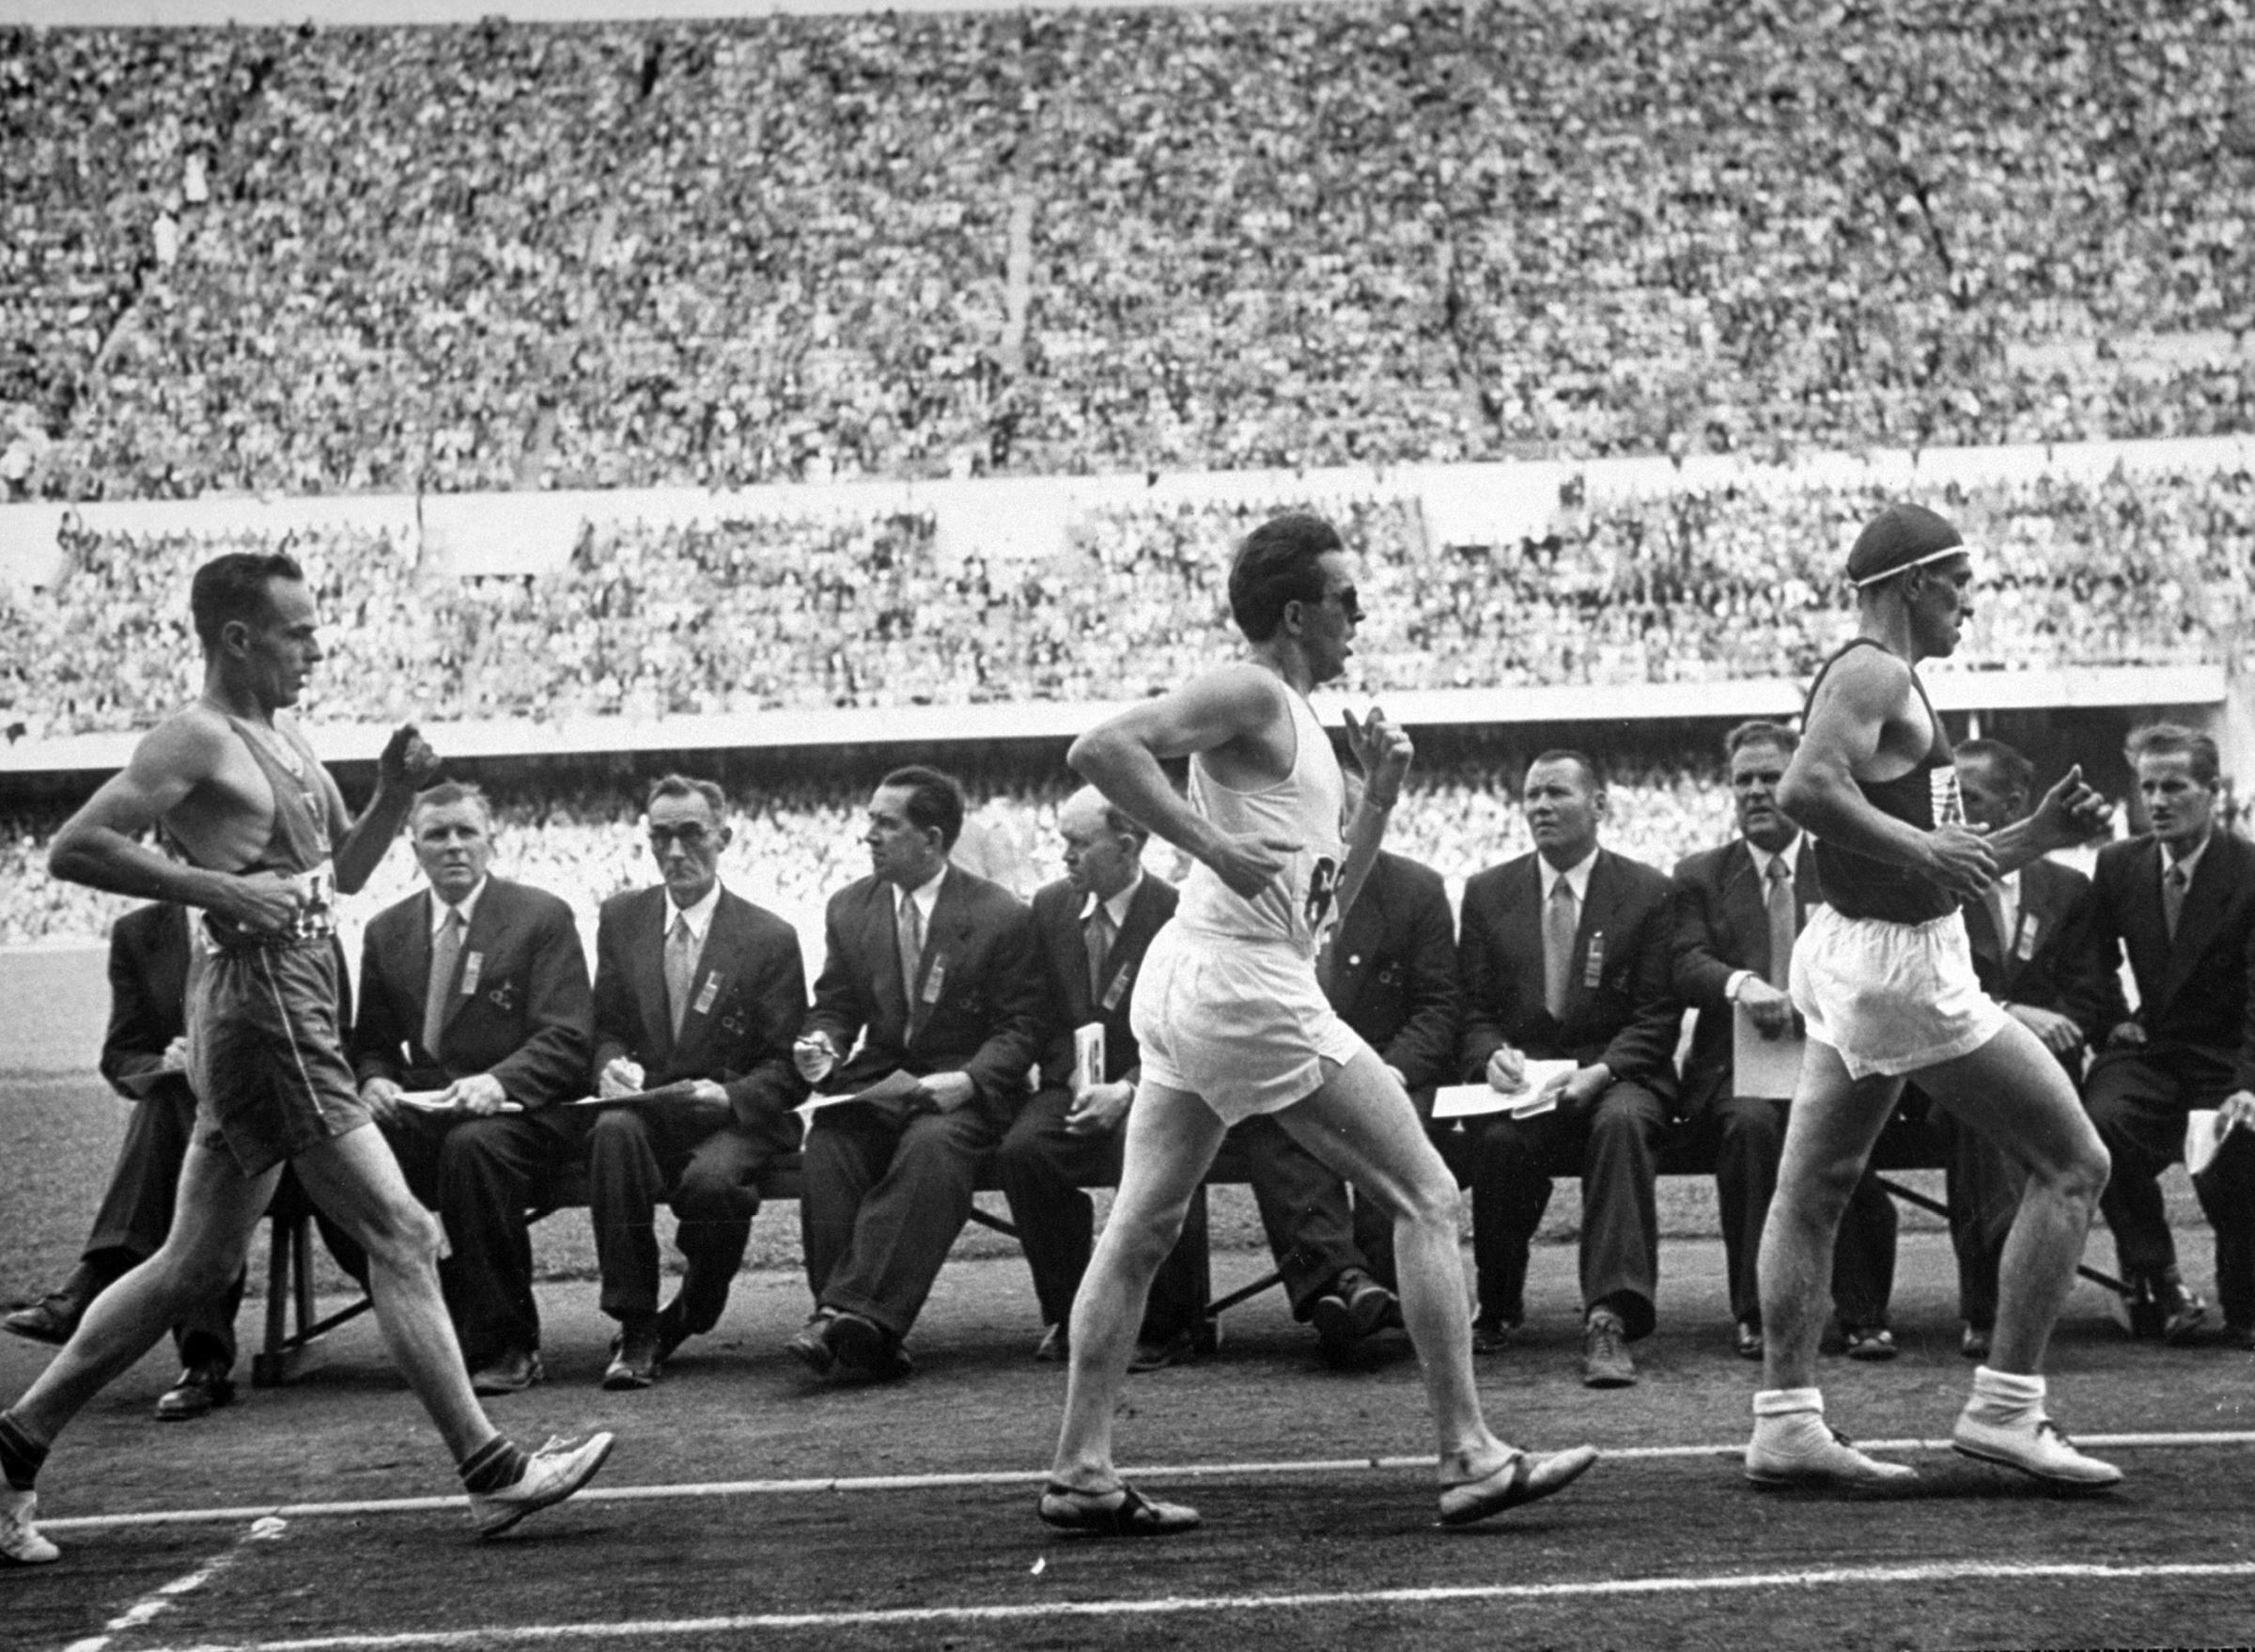 Athletes competing in the 10,000-meter walk at the 1952 summer Olympics in Helsinki, Finland.